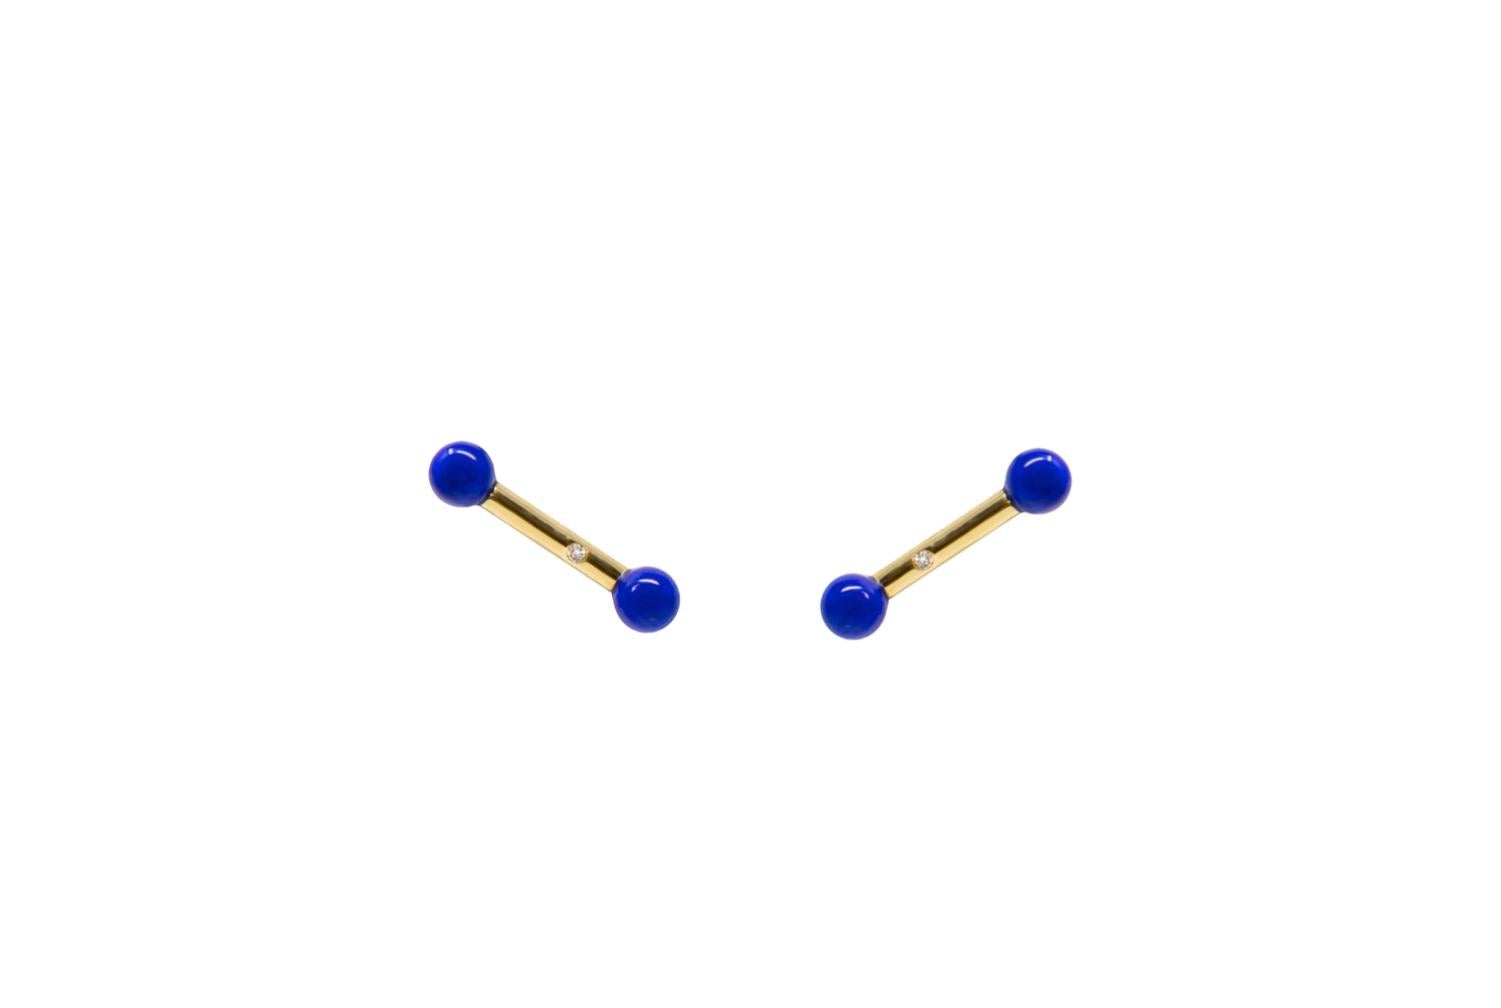  18 Carat Yellow Gold Earrings with Diamonds, Lapis Lazuli. Lapis Lazuli Cuff Chained. Earrings can be worn with or without the Blue Chalcedony Pearl Cuff.
HAND CARVED STONES made from a Specific Unique Designed. HANDCRAFTED IN FRANCE.
The Designer,